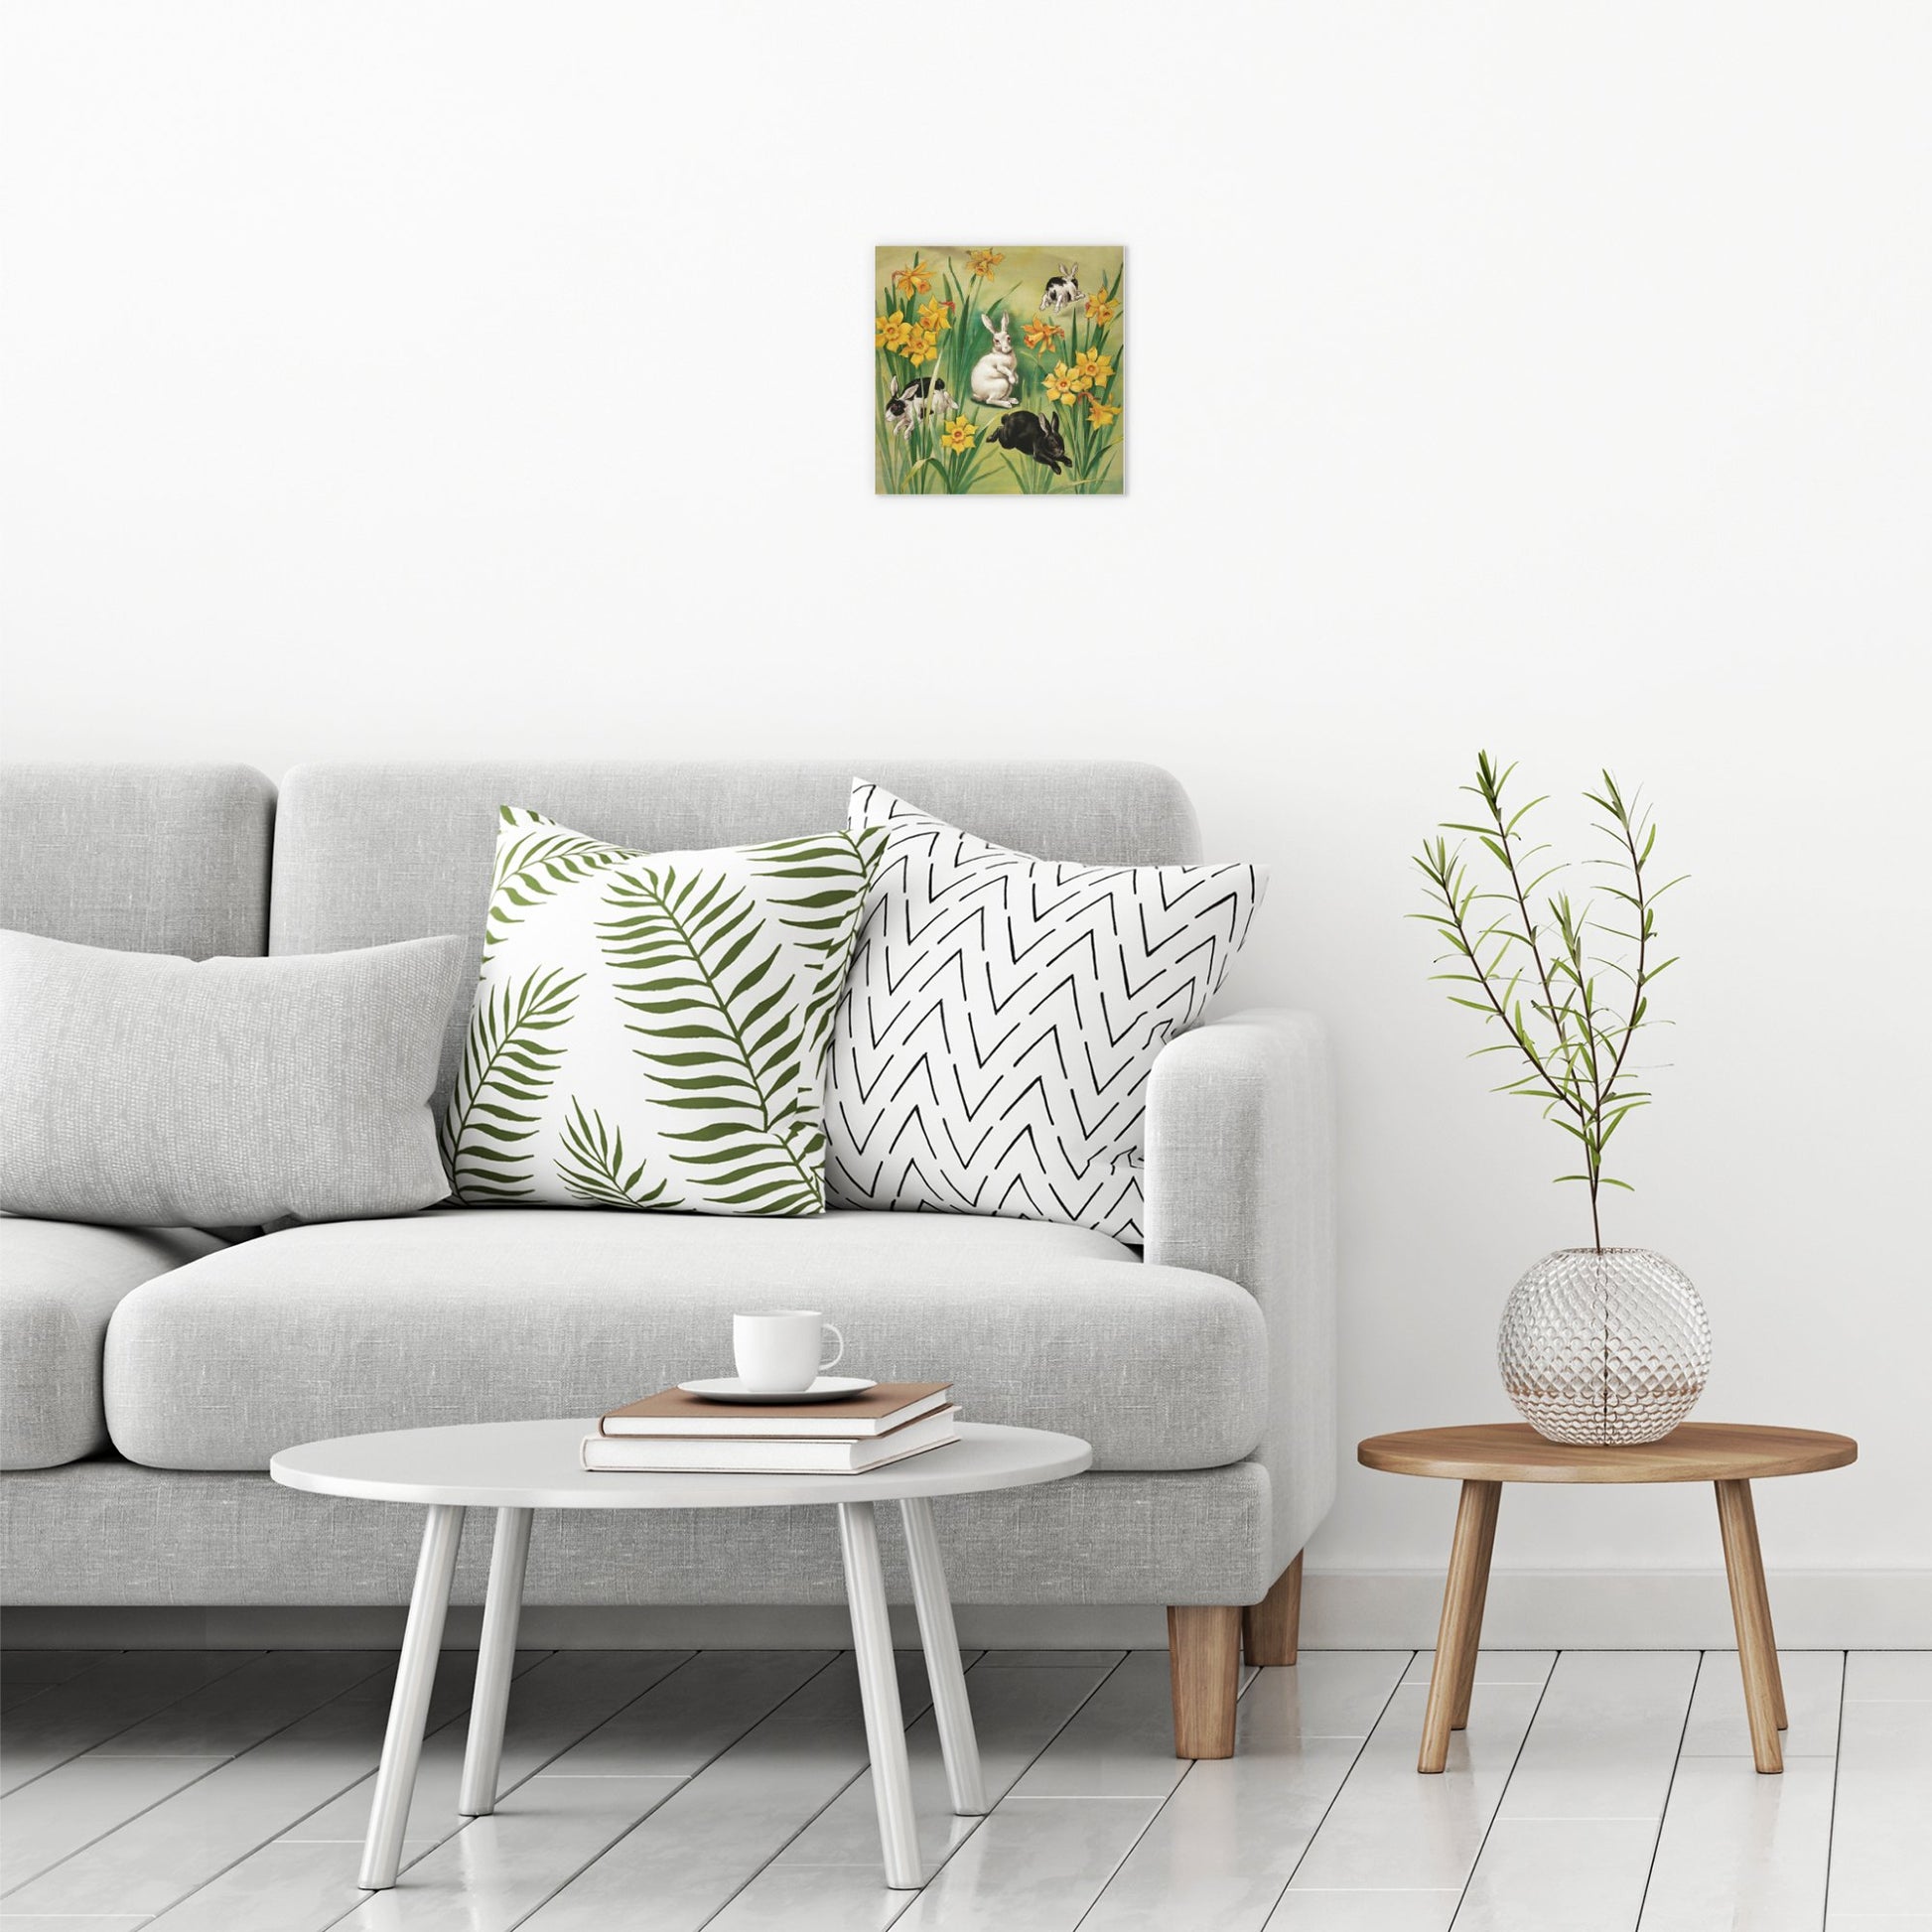 A contemporary modern room view showing a small size metal art poster display plate with printed design of a Bunnies and Daffodils Vintage Illustration